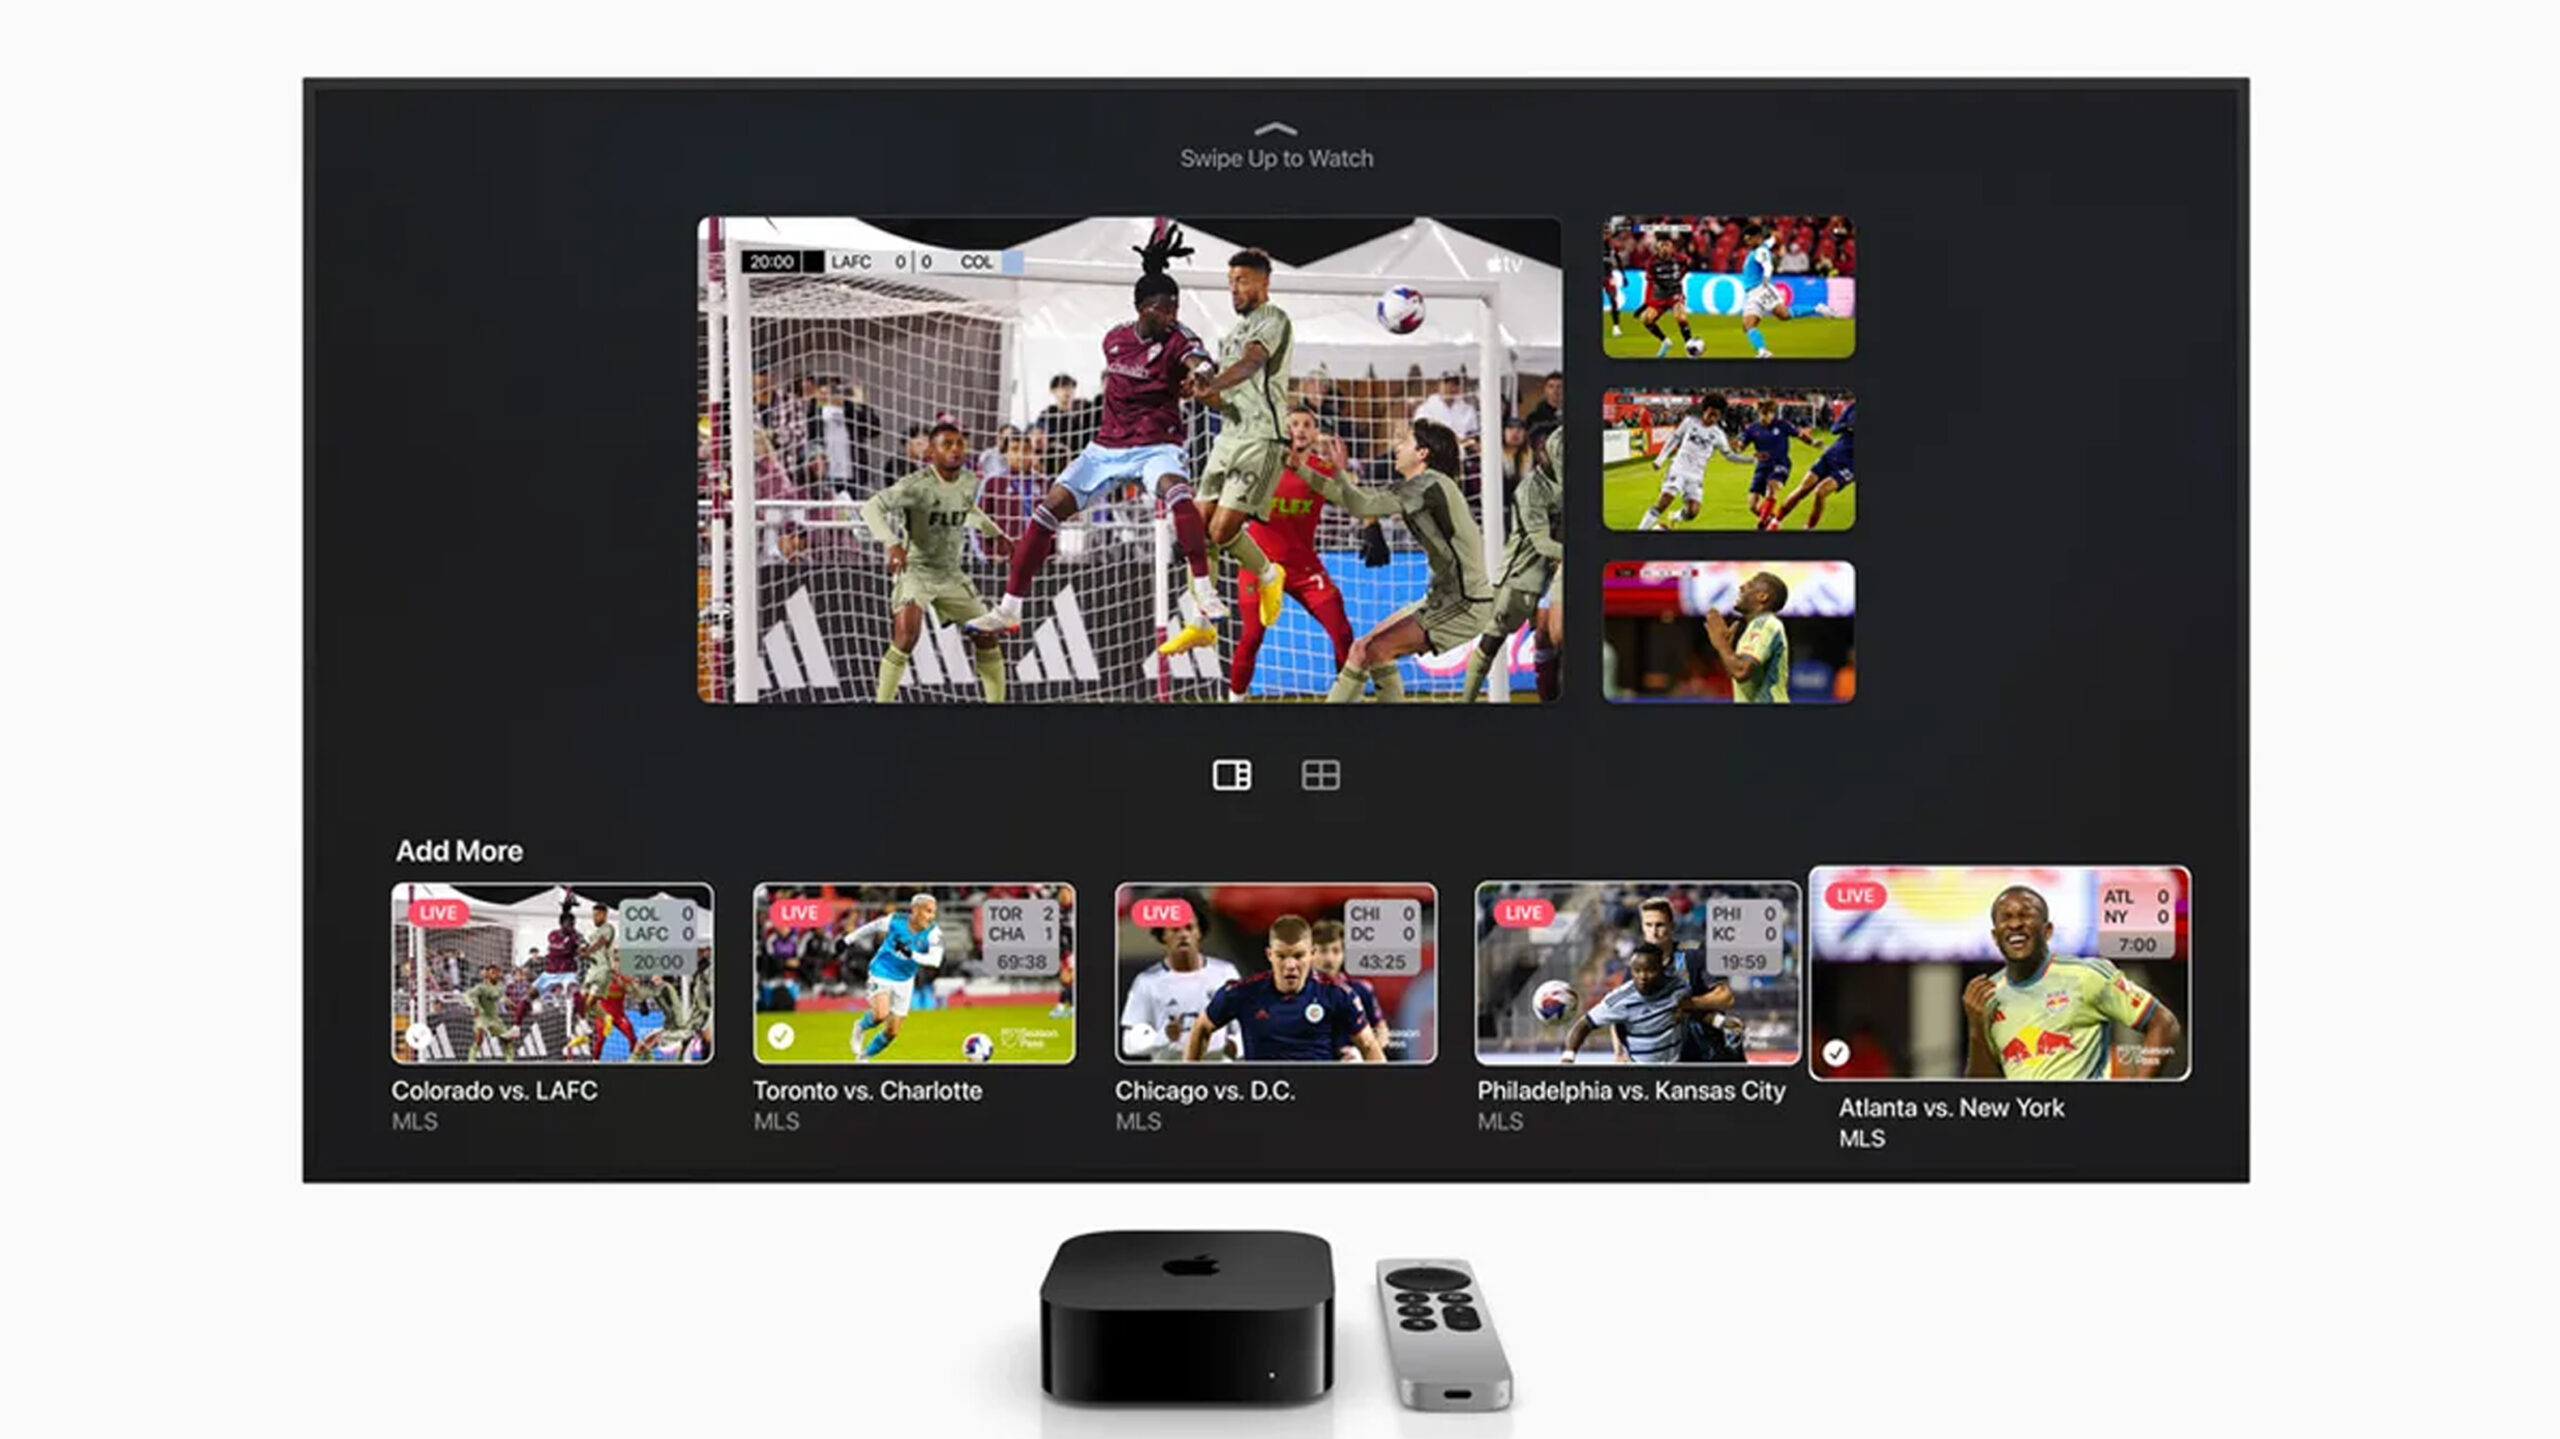 Multiview for live sports is finally coming to Apple TV